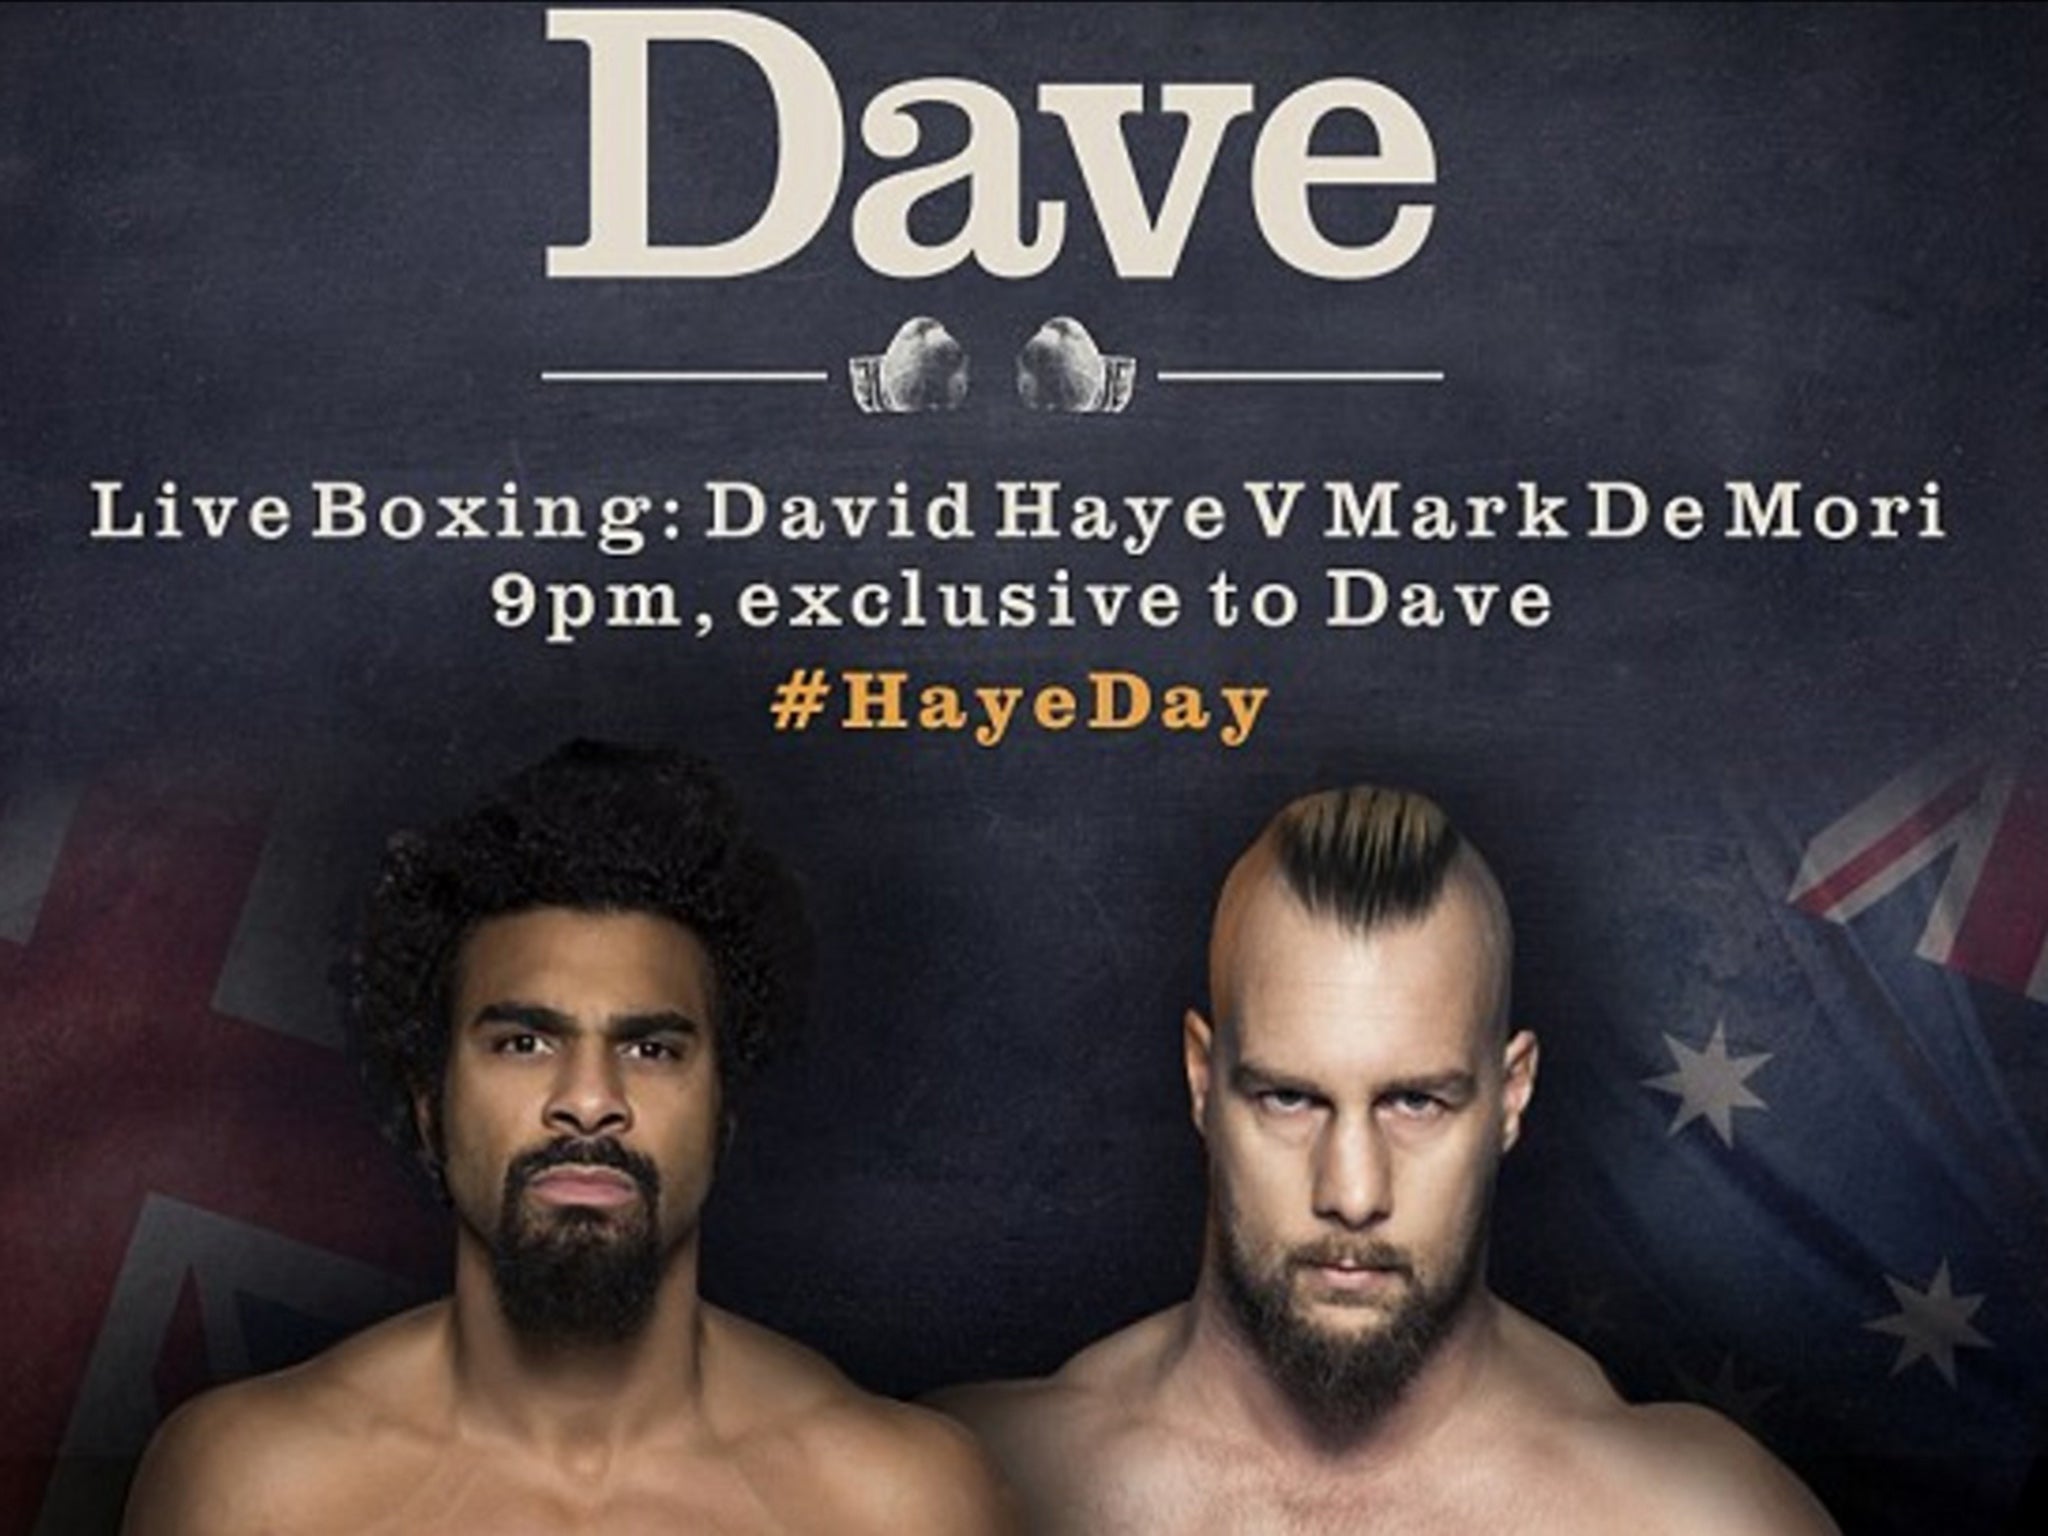 The promotional poster for David Haye's upcoming fight